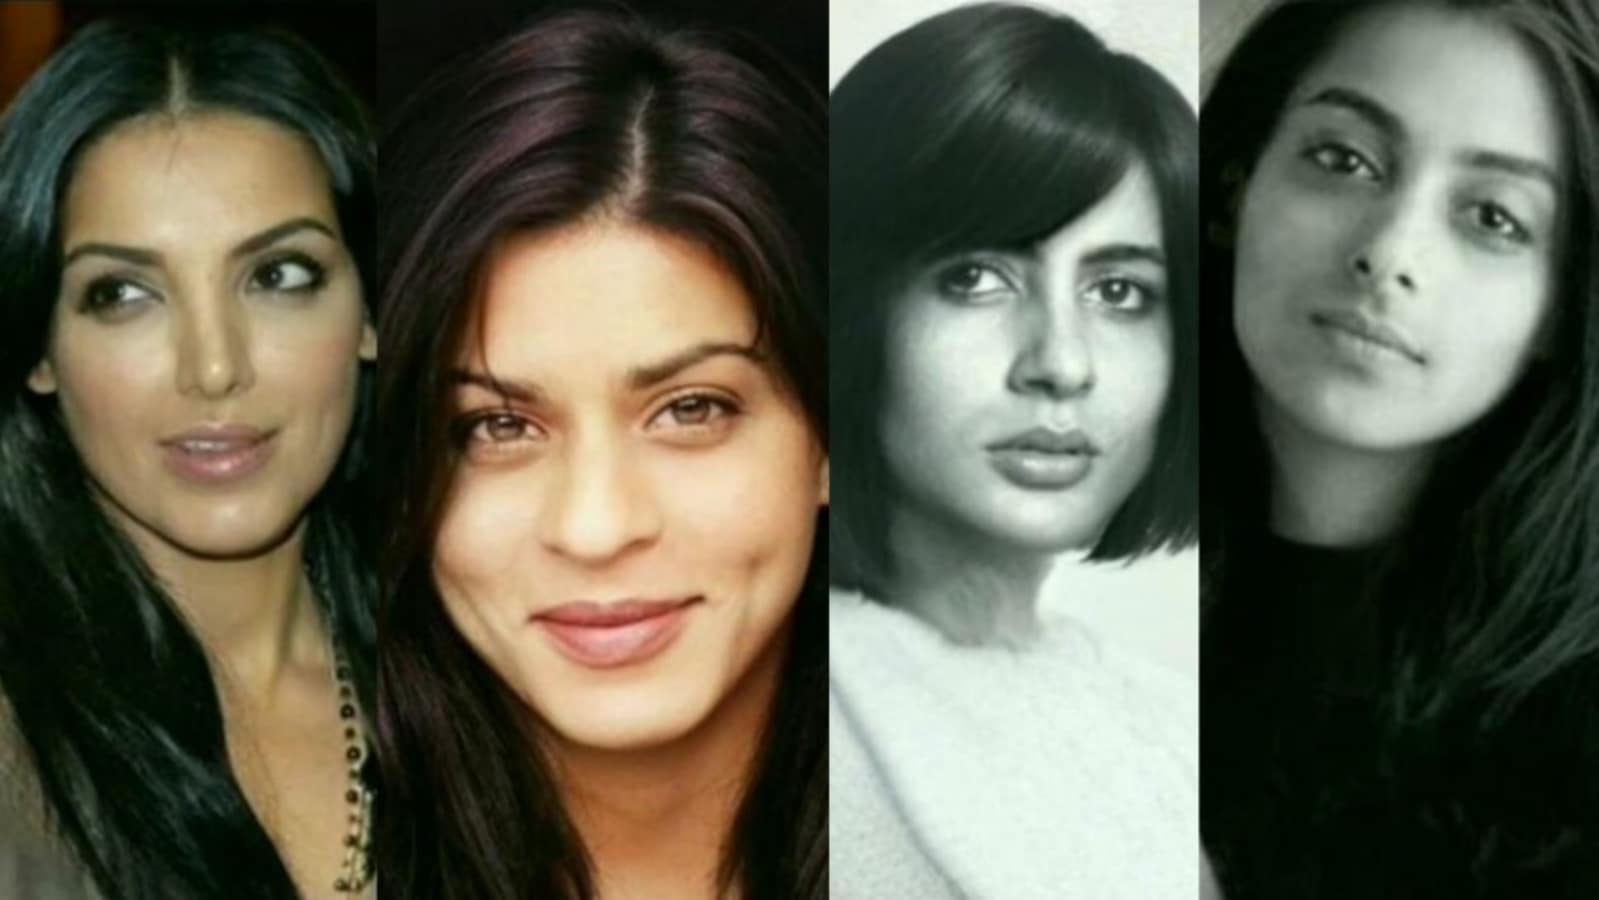 Reddit video imagines what Bollywood superstars would look like as women |  Bollywood - Hindustan Times